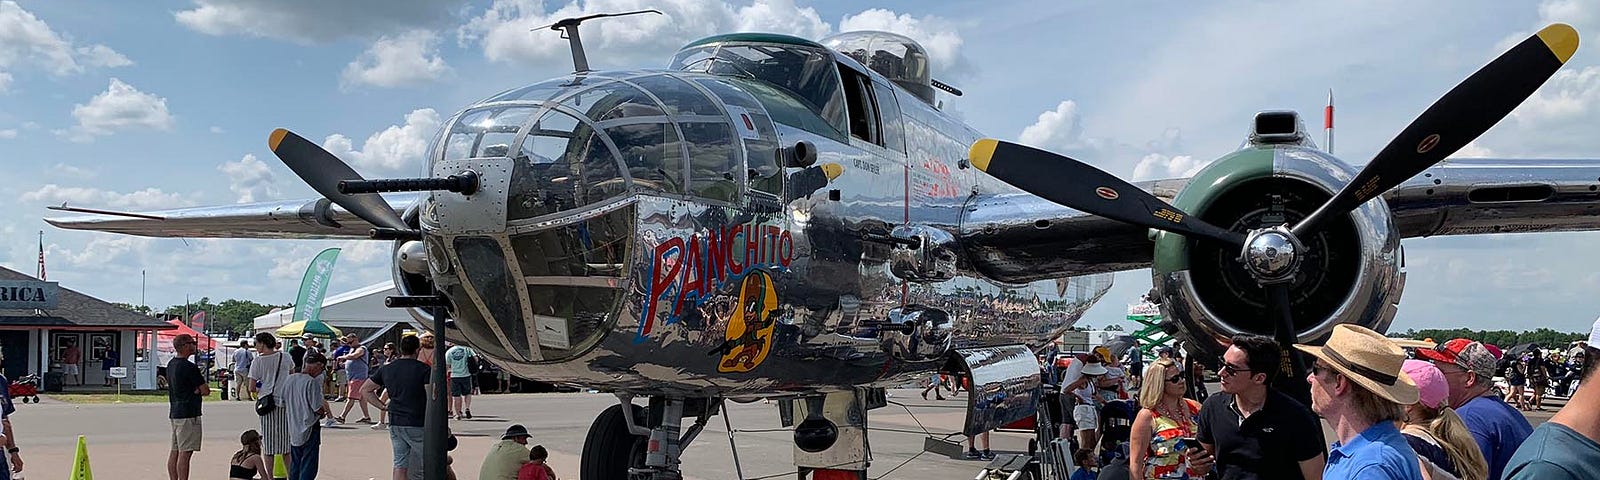 Photo of the B-24 bomber Panchito from Sun-n-Fun 2018